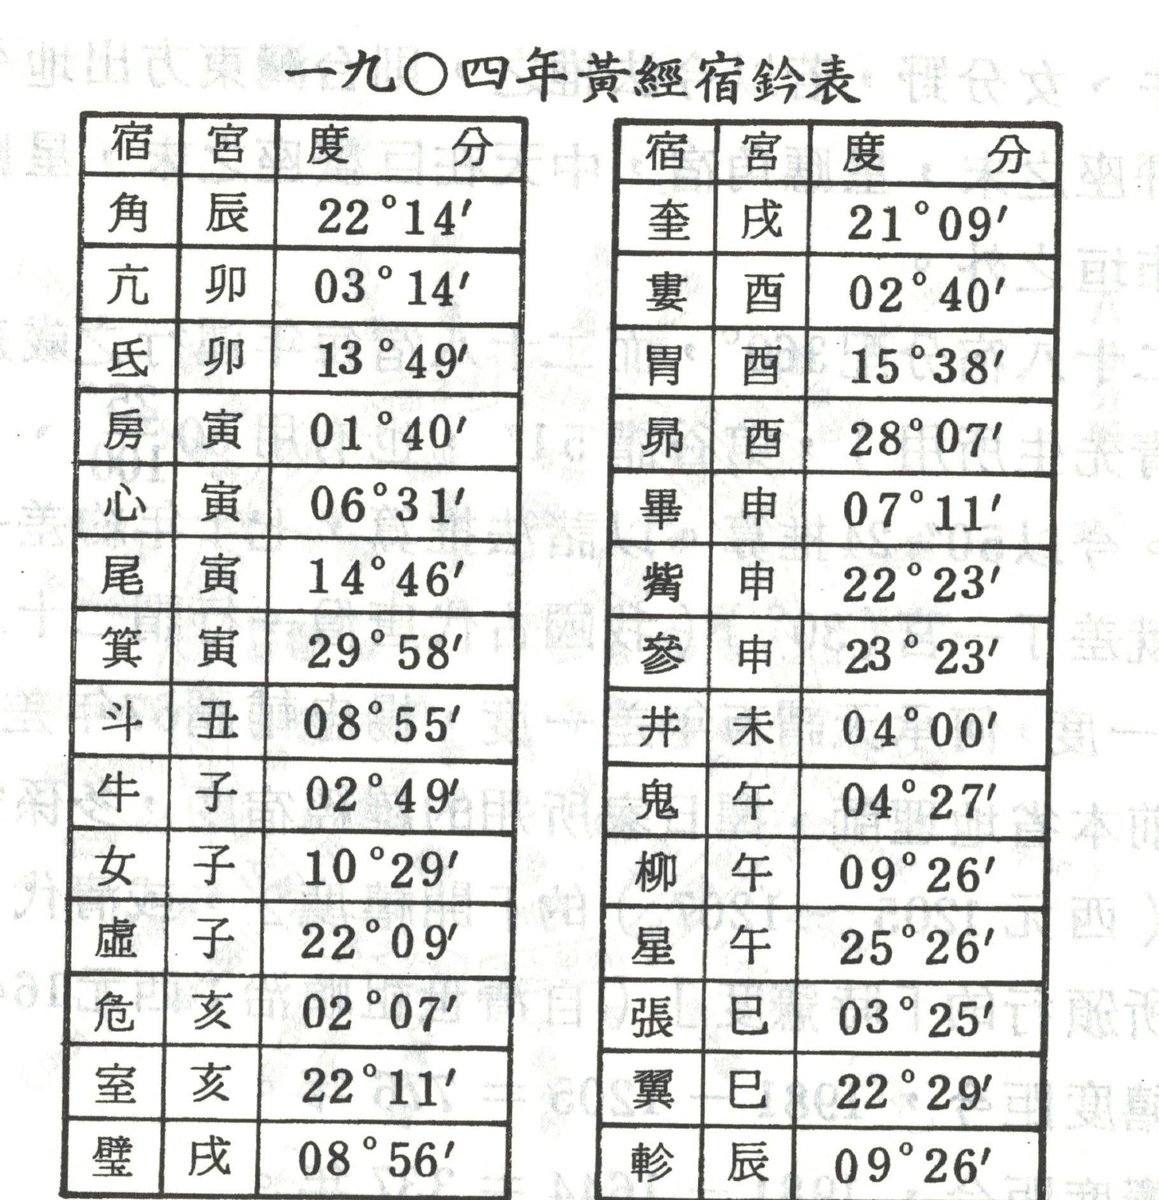 4/ Here are the ecliptic coordinates of their cusps as of 1904: (Taken from "A practical guide to selecting auspicious days by Heavenly Stars" Tianxing Suanfa Shiwu= "" 天星擇日算法實務, by Zhong yiming 鍾義明, pub'd by Wulin Chubanshe 武陵出版社，, 1997], along with a transl.